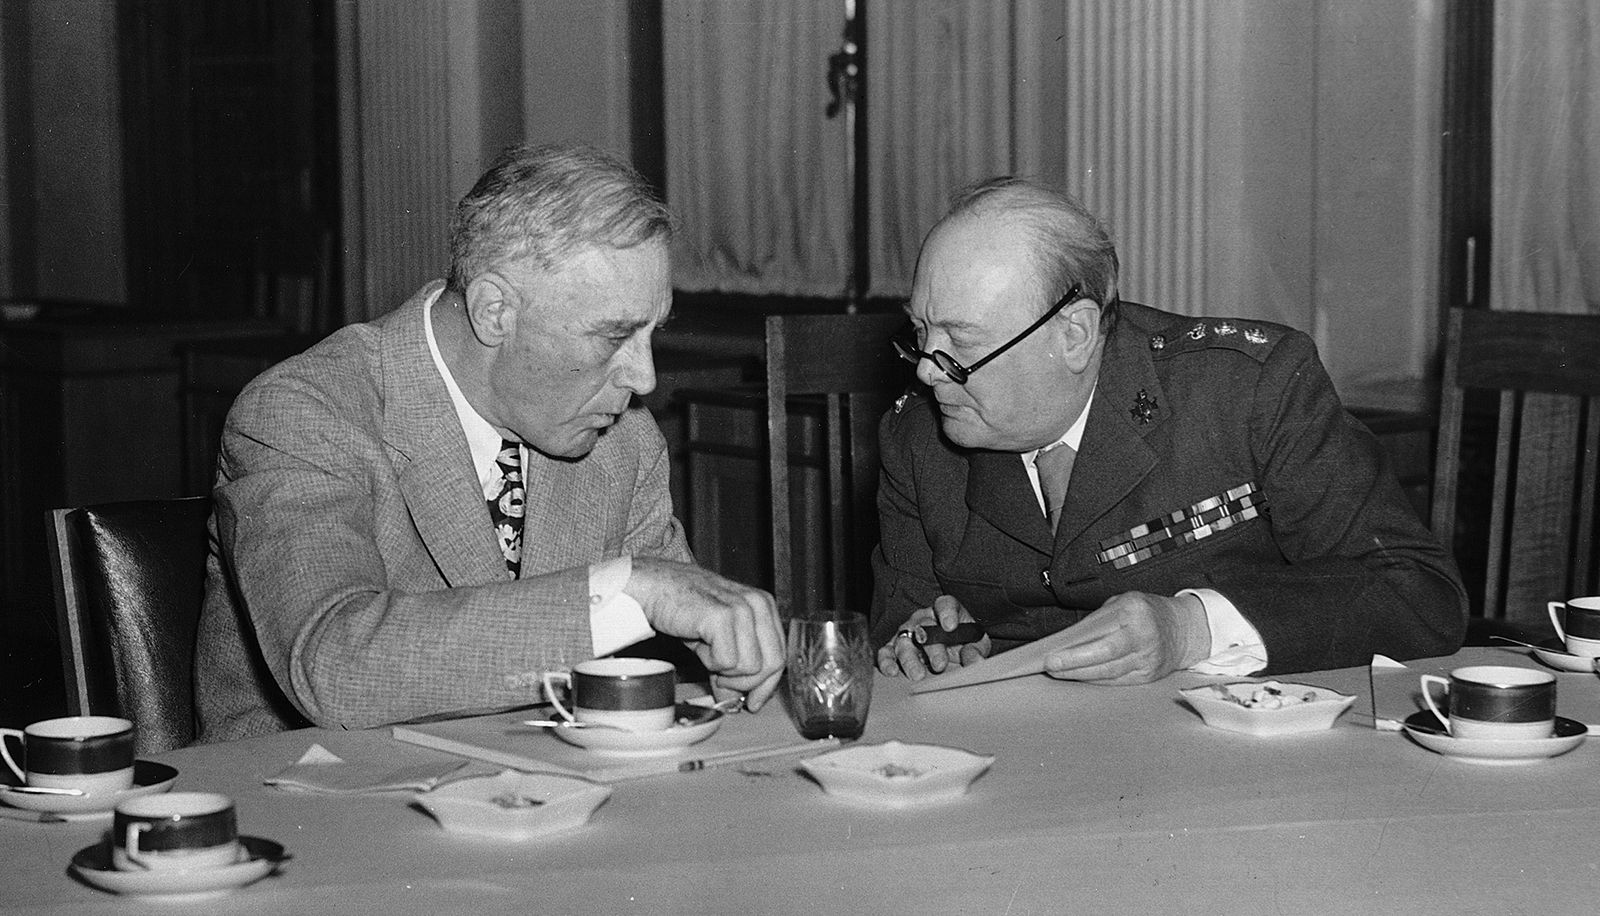 Alt-Text: A photograph of Winston Churchill sitting with Franklin D. Roosevelt at the Yalta Conference